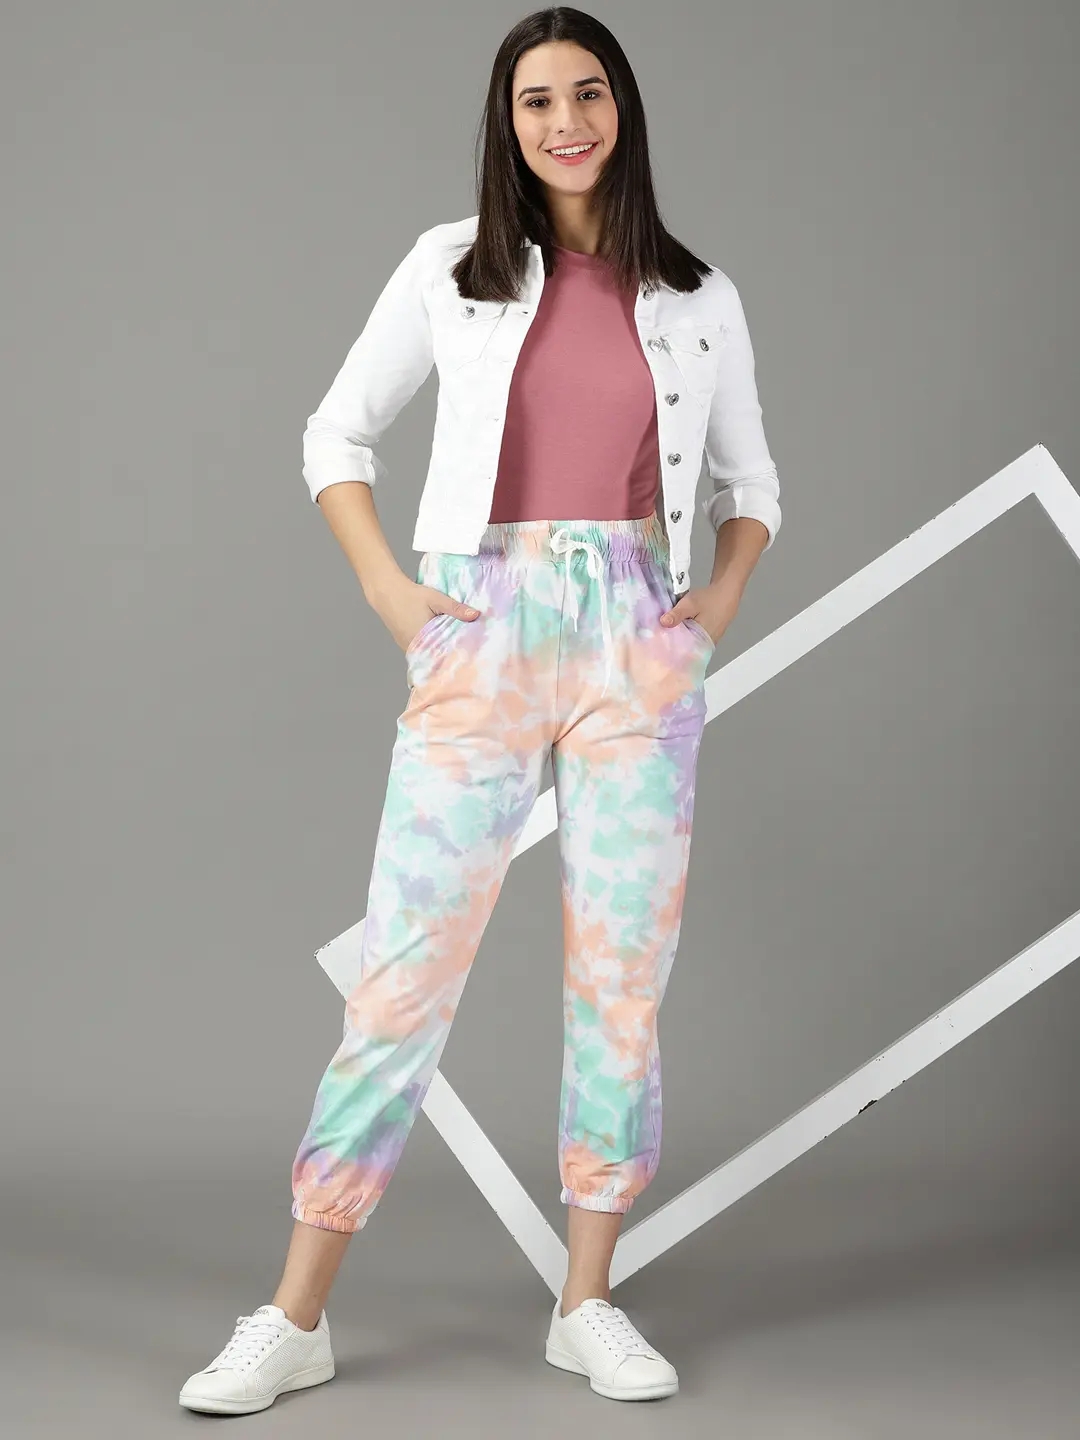 SHOWOFF Women's Tie and Dye Multi Regular Fit Track Pant